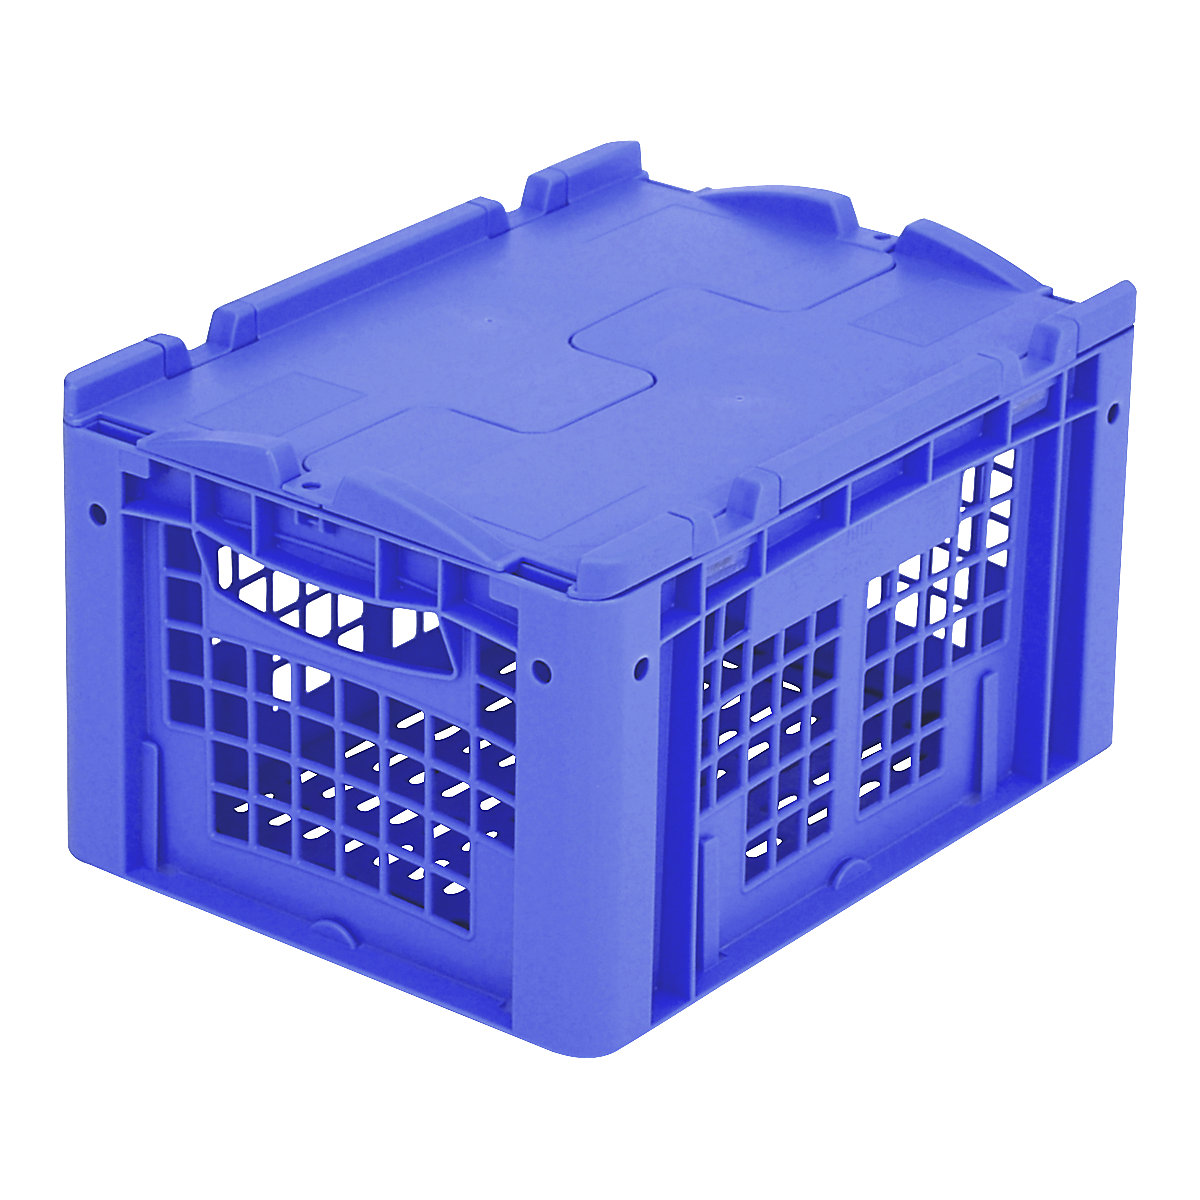 XL Euro stacking container – BITO, with lid, perforated, LxWxH 400 x 300 x 238 mm-3